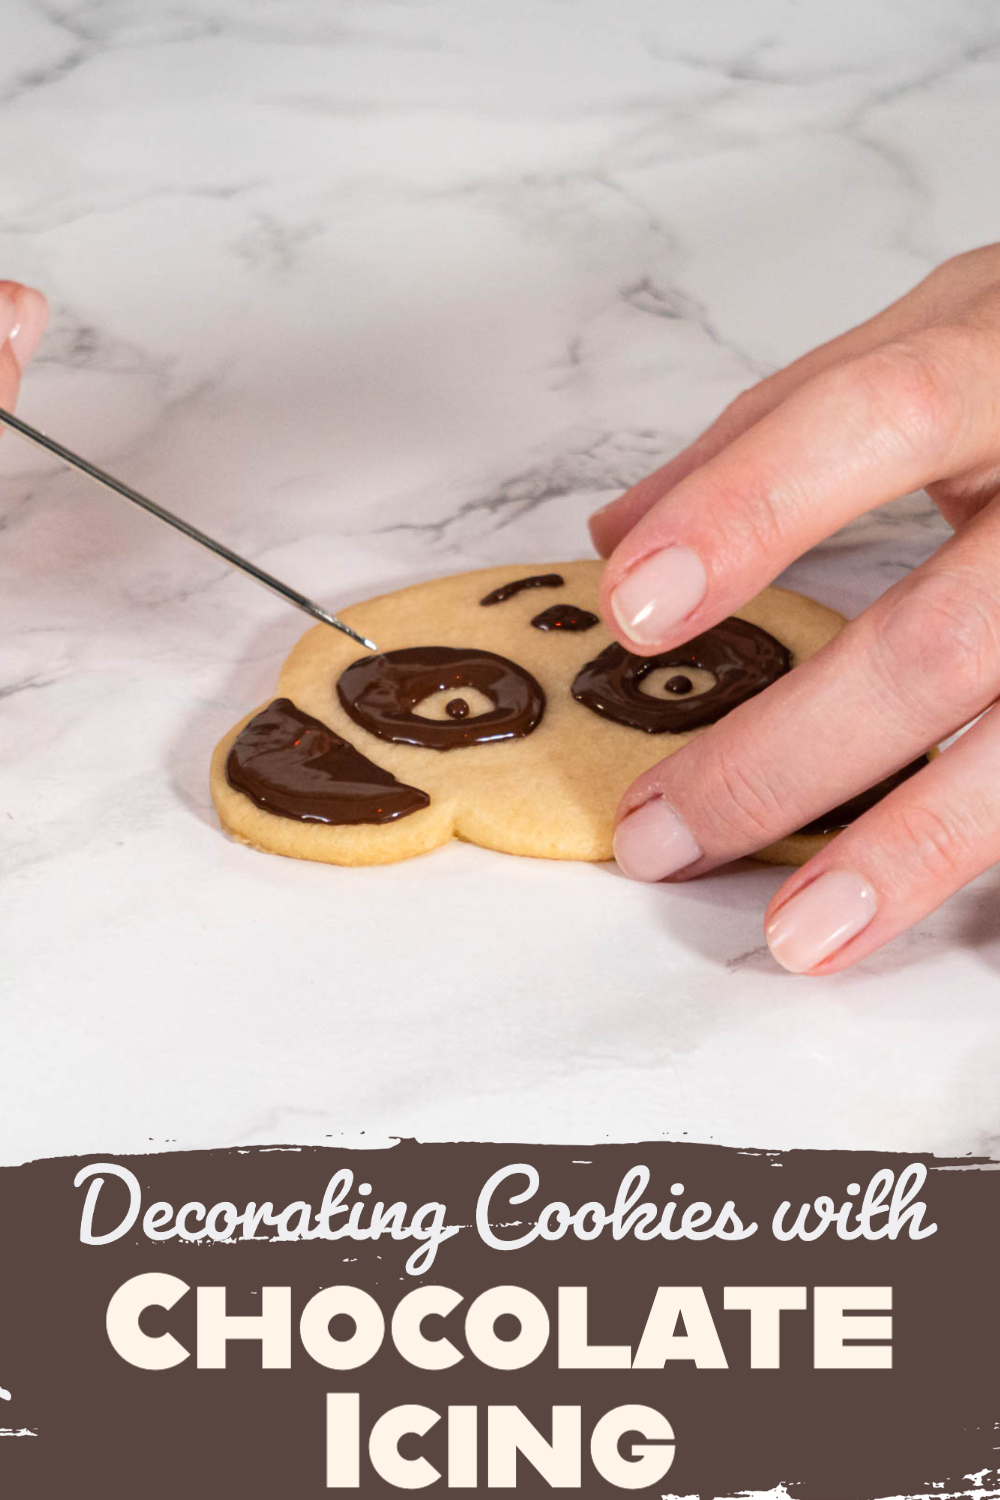 Decorating Cookies with Chocolate Icing